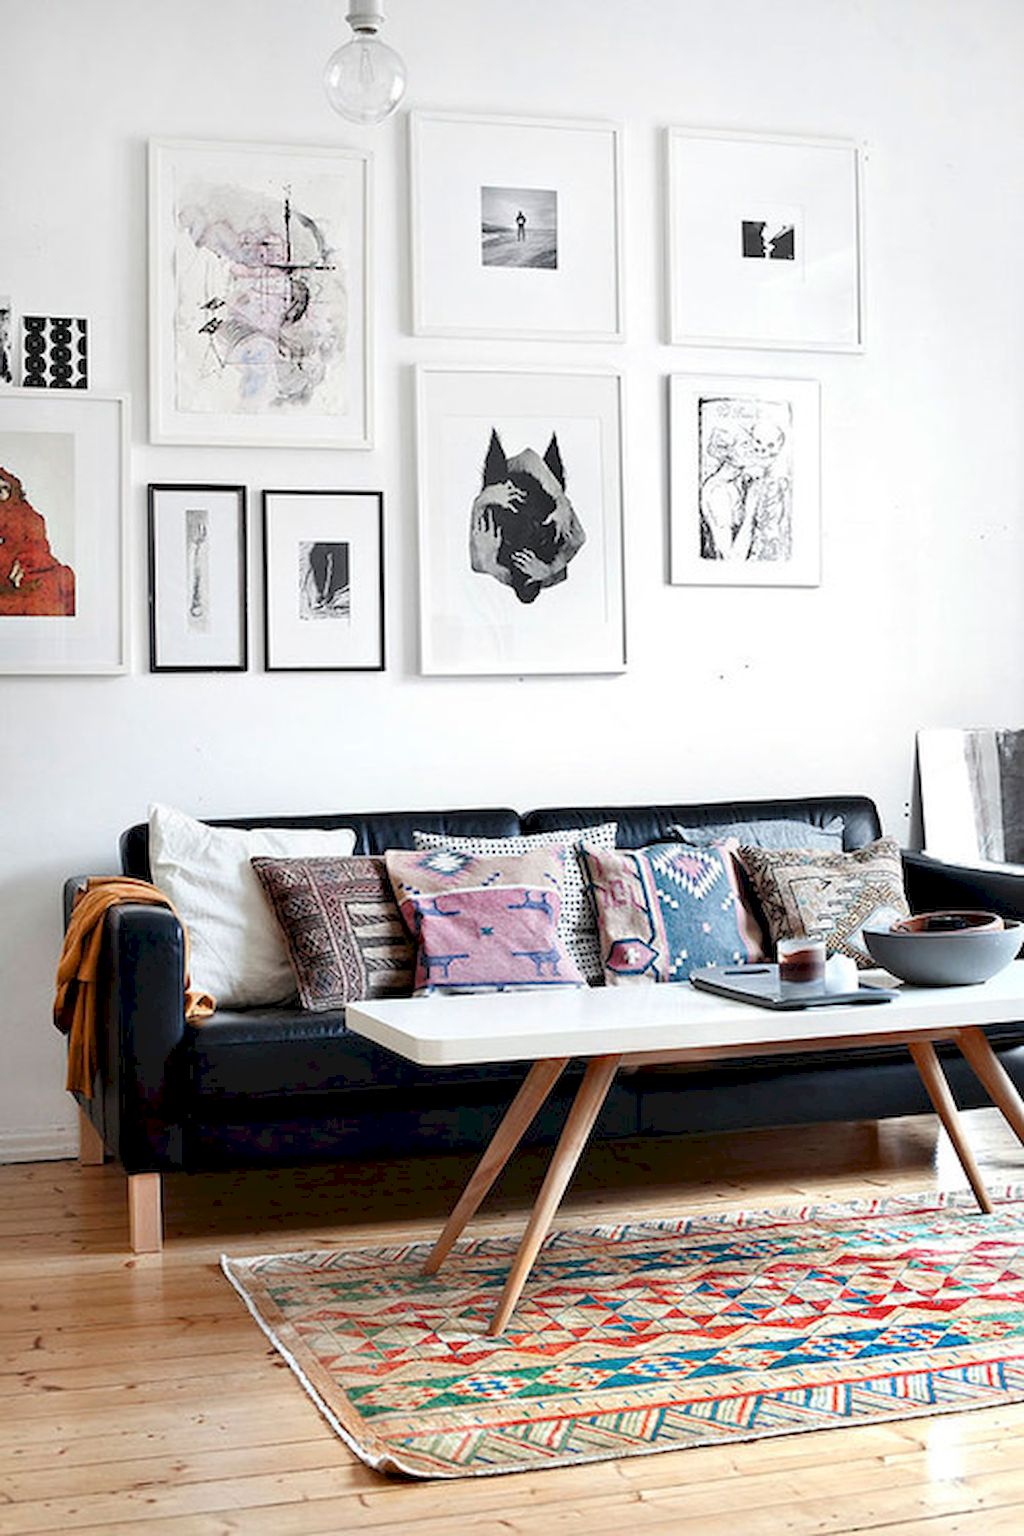 5 Black Leather Sofas, Or 'We Found What Your Living Room Was Missing'